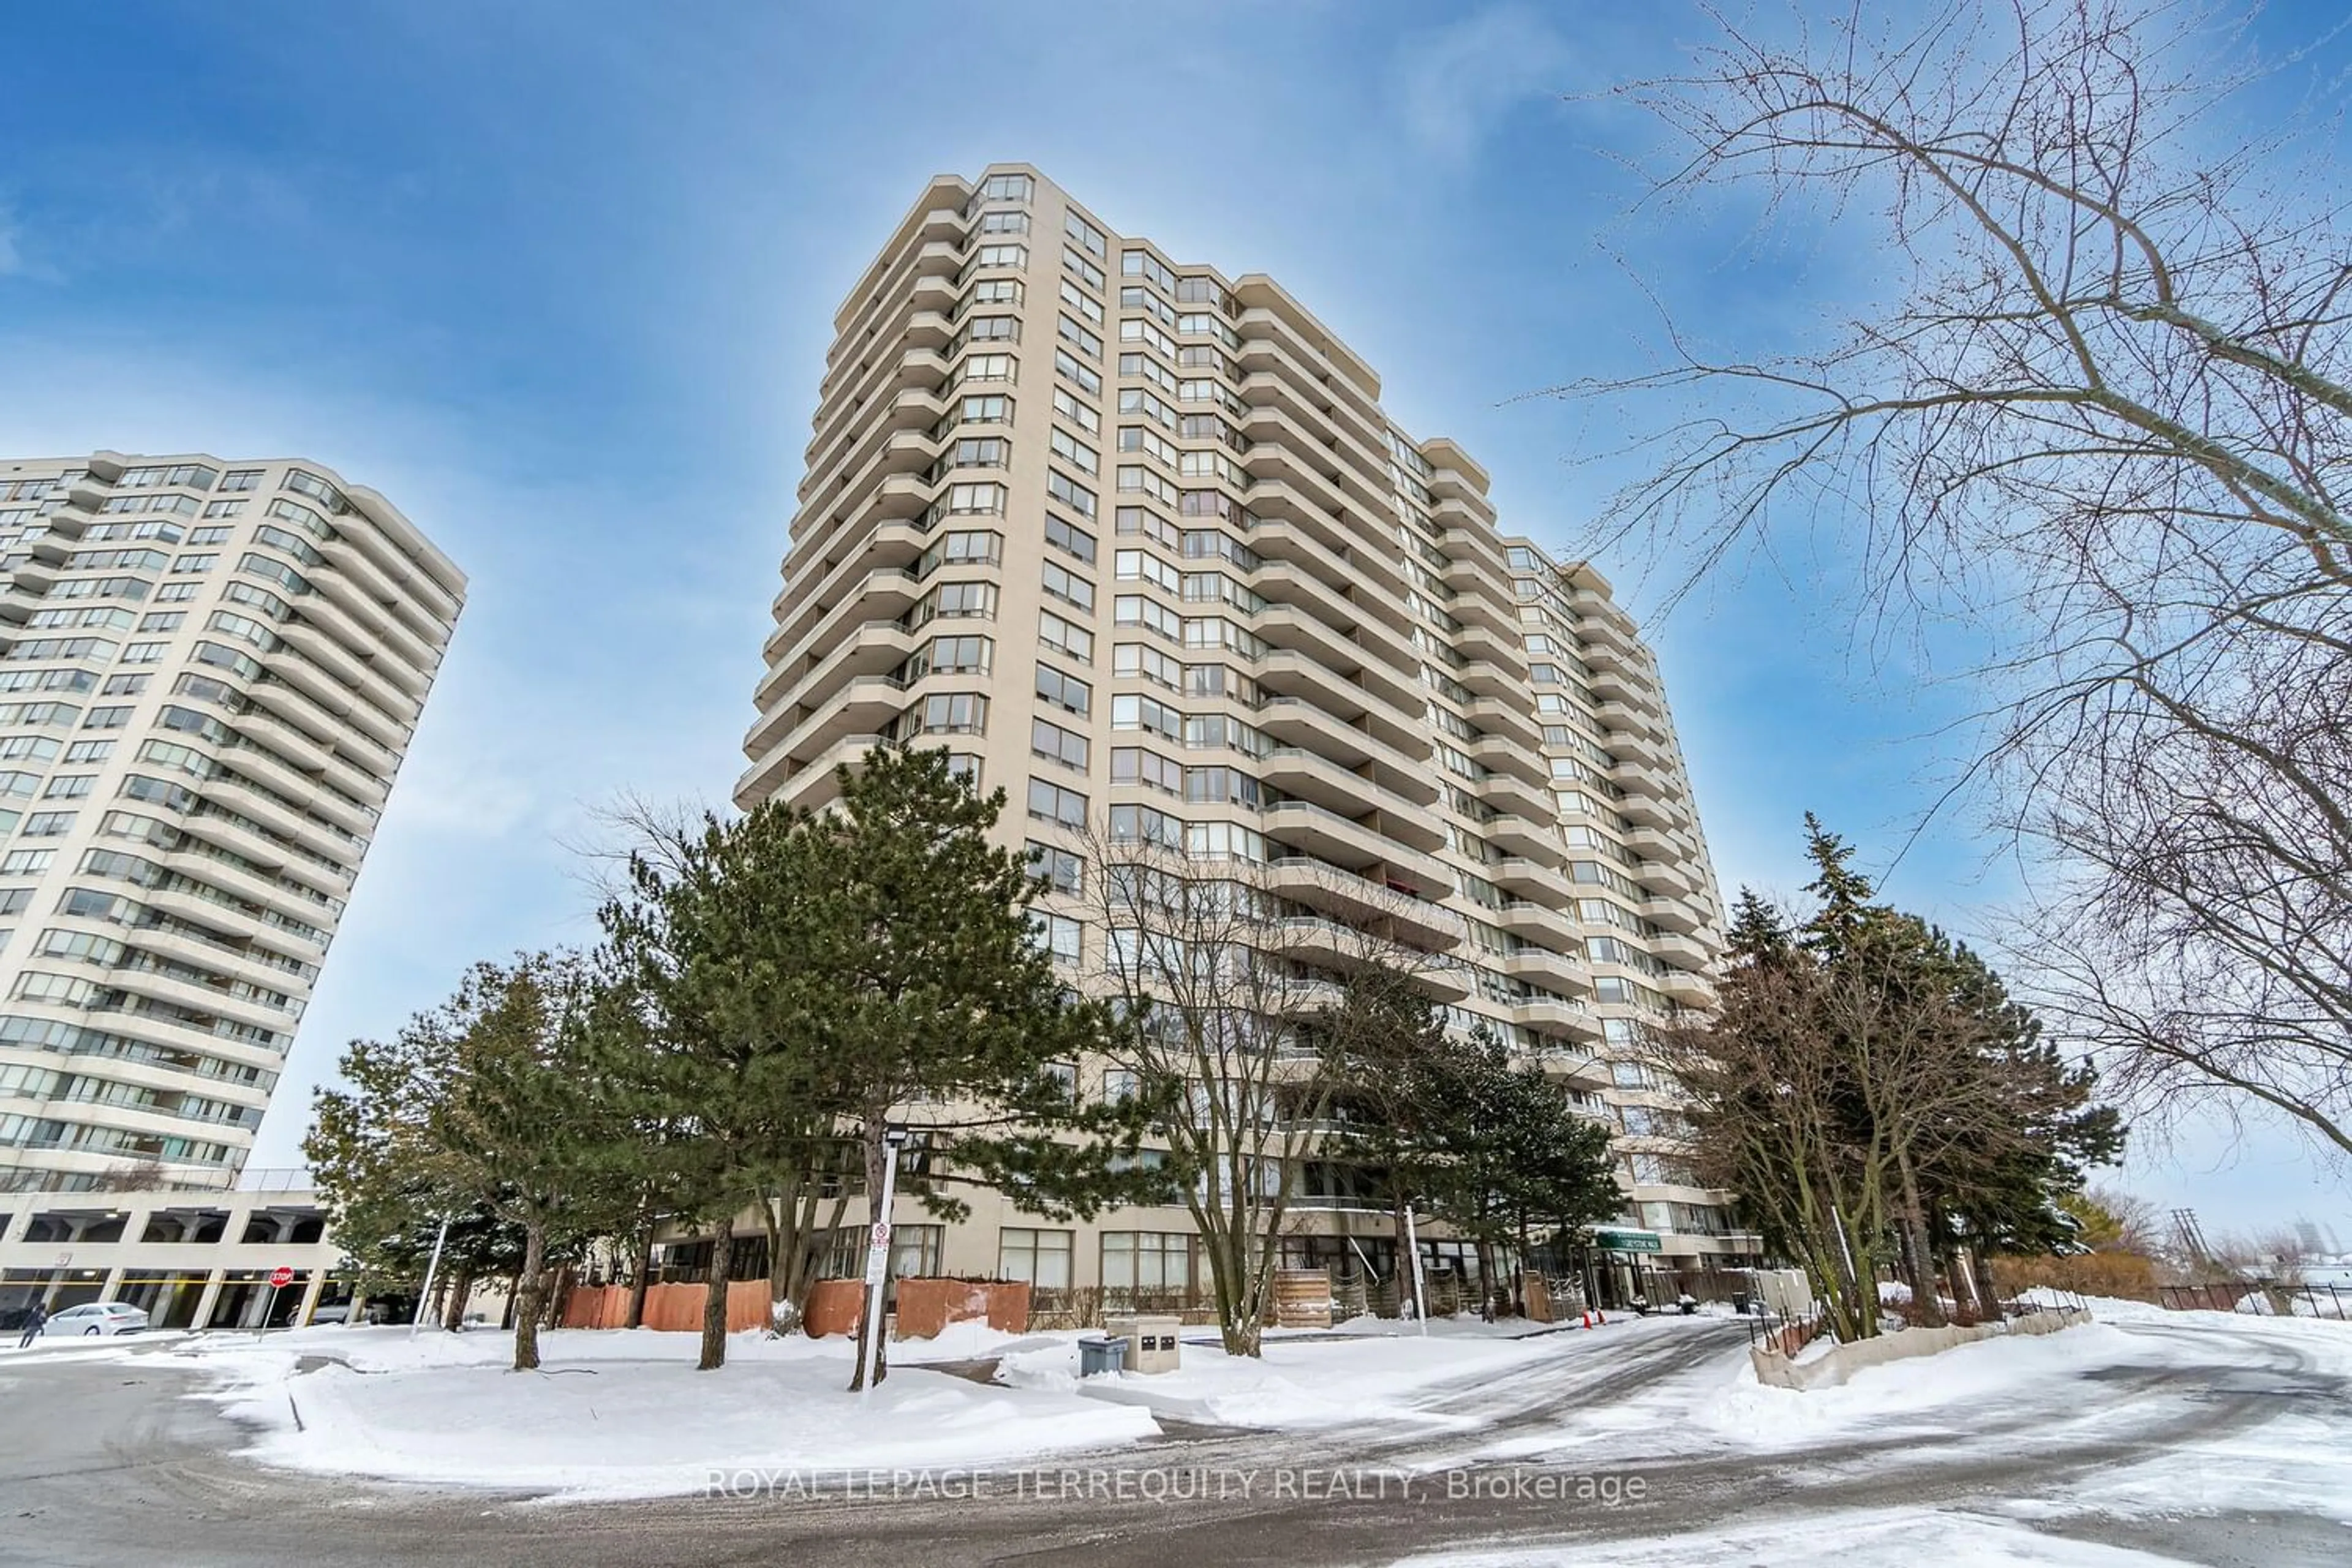 A pic from exterior of the house or condo for 1 Greystone Walk Dr #991, Toronto Ontario M1K 5J3